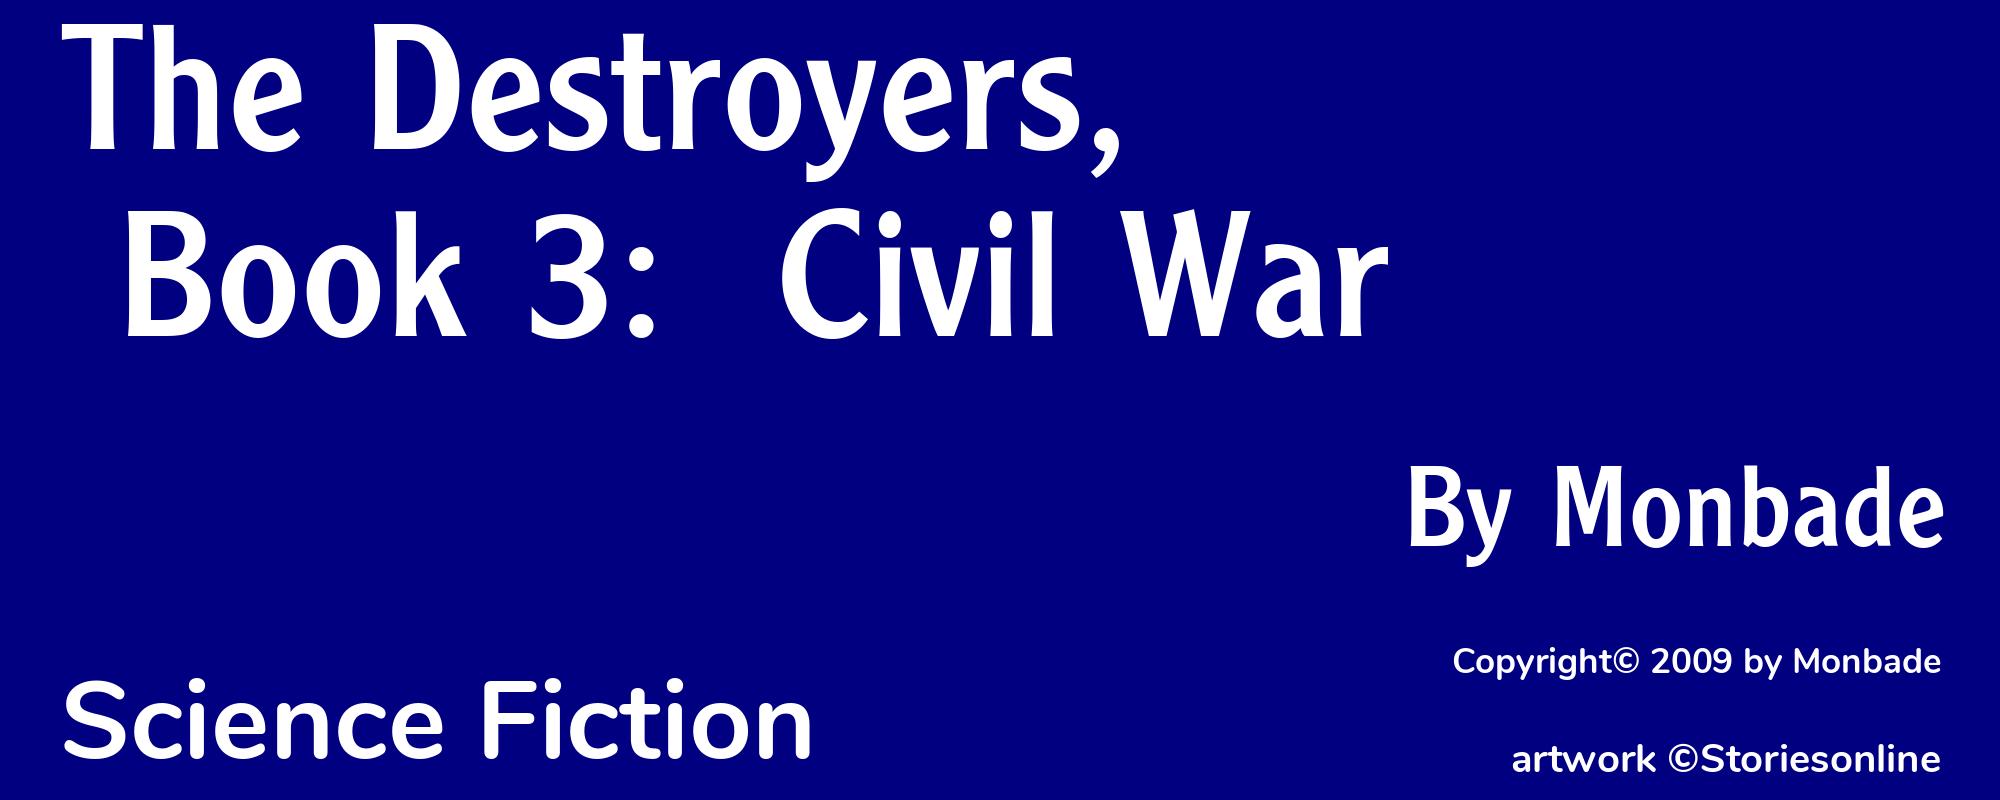 The Destroyers, Book 3:  Civil War - Cover